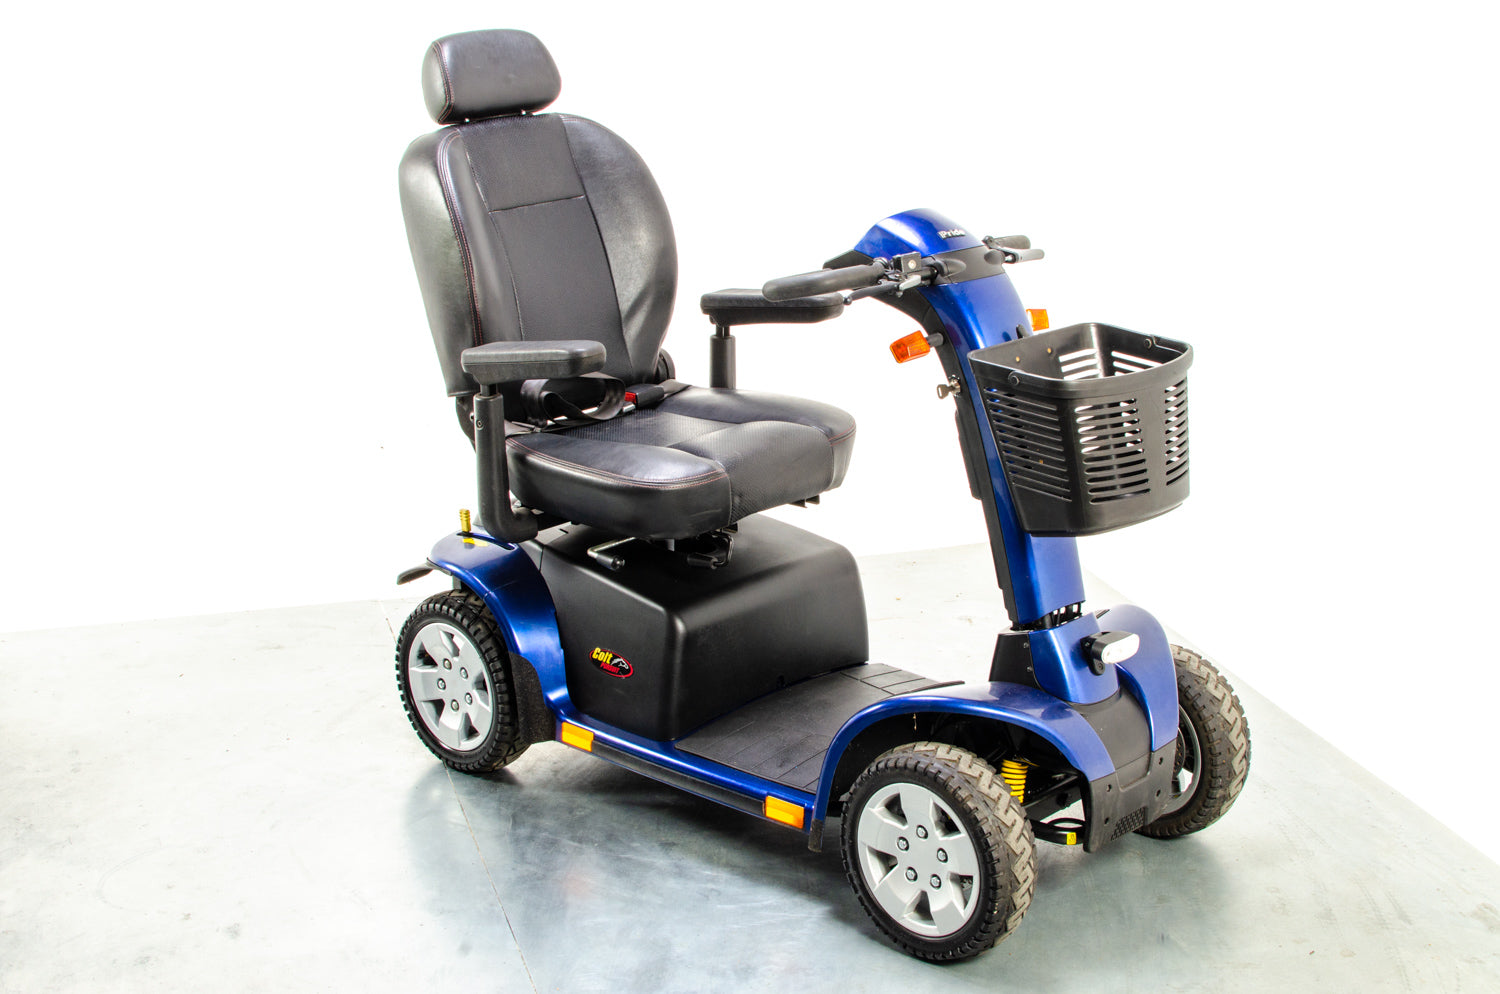 Pride Colt Pursuit Used Mobility Scooter 8mph Large All-Terrain Transportable